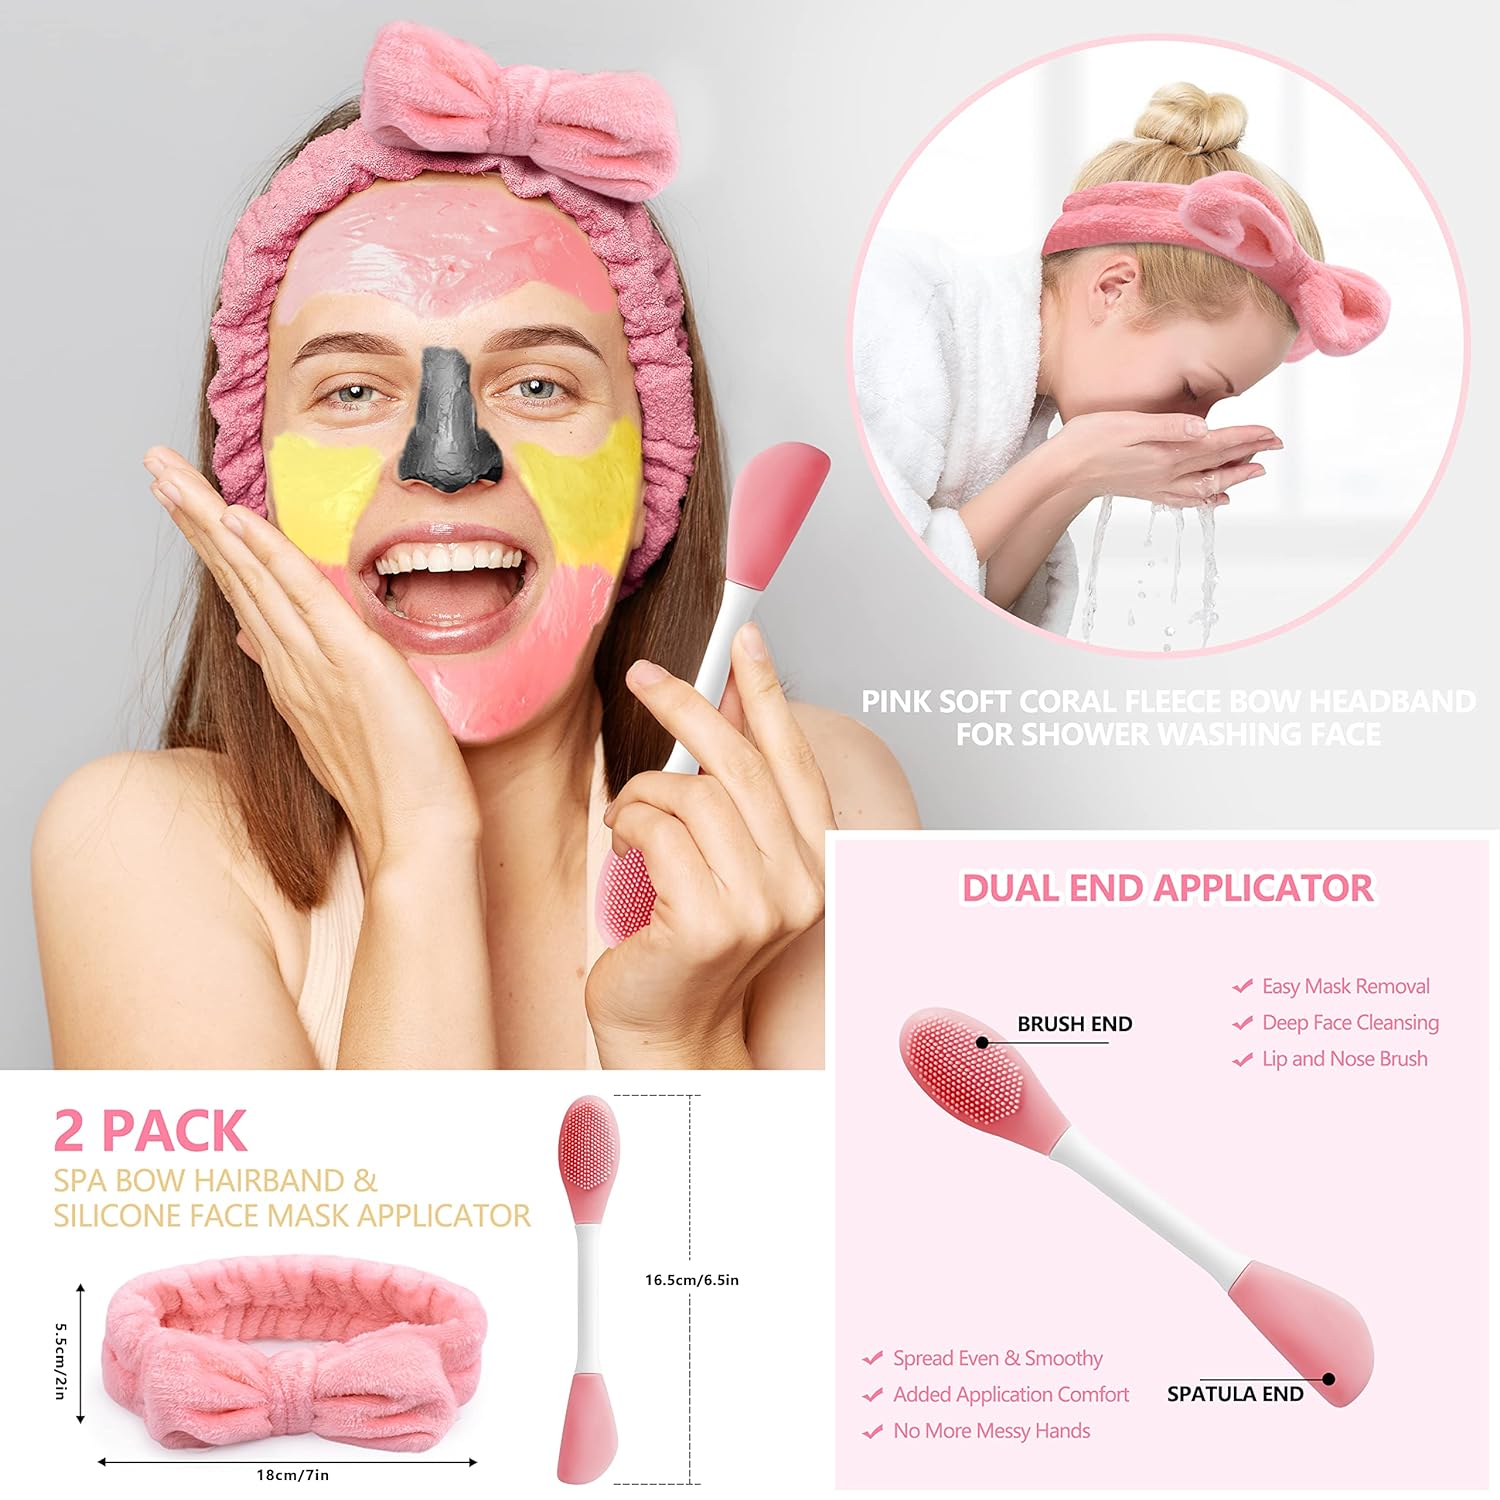 Wholesale prices with free shipping all over United States 5 Pcs Face Mask Skin Care Set for Deep Pore Cleansing Turmeric Vitamin C Clay Mask, Dead Sea Mud Mask, Rose Clay Mask for Face Masks Skincare Personal Skin Care Products Gifts Headbands for Women - Steven Deals